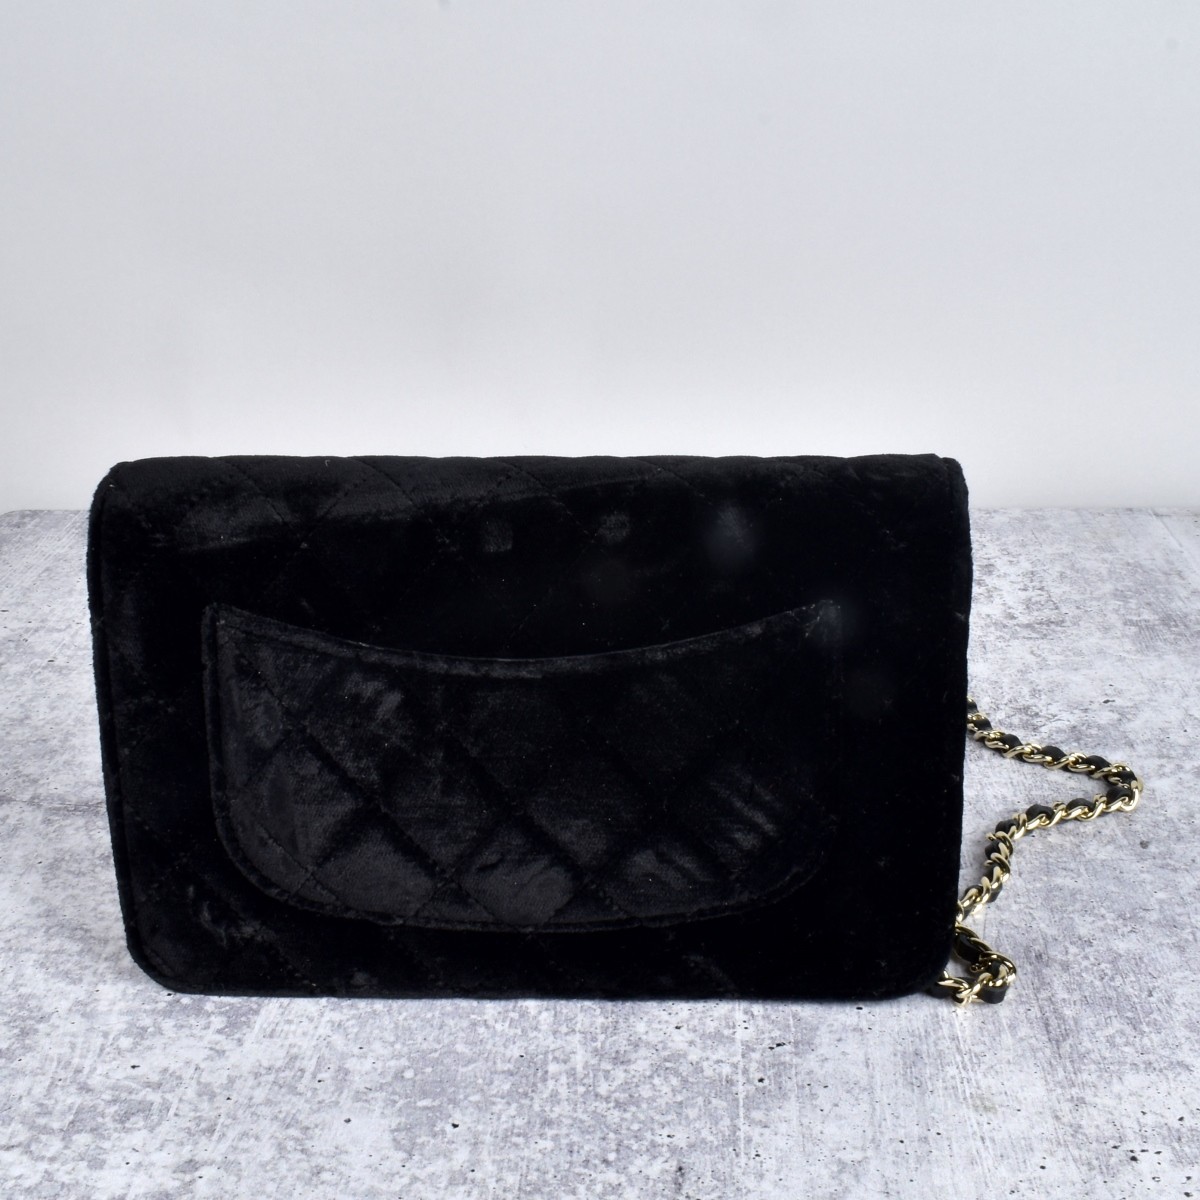 Chanel Black Quilted Suede Crossbody Bag